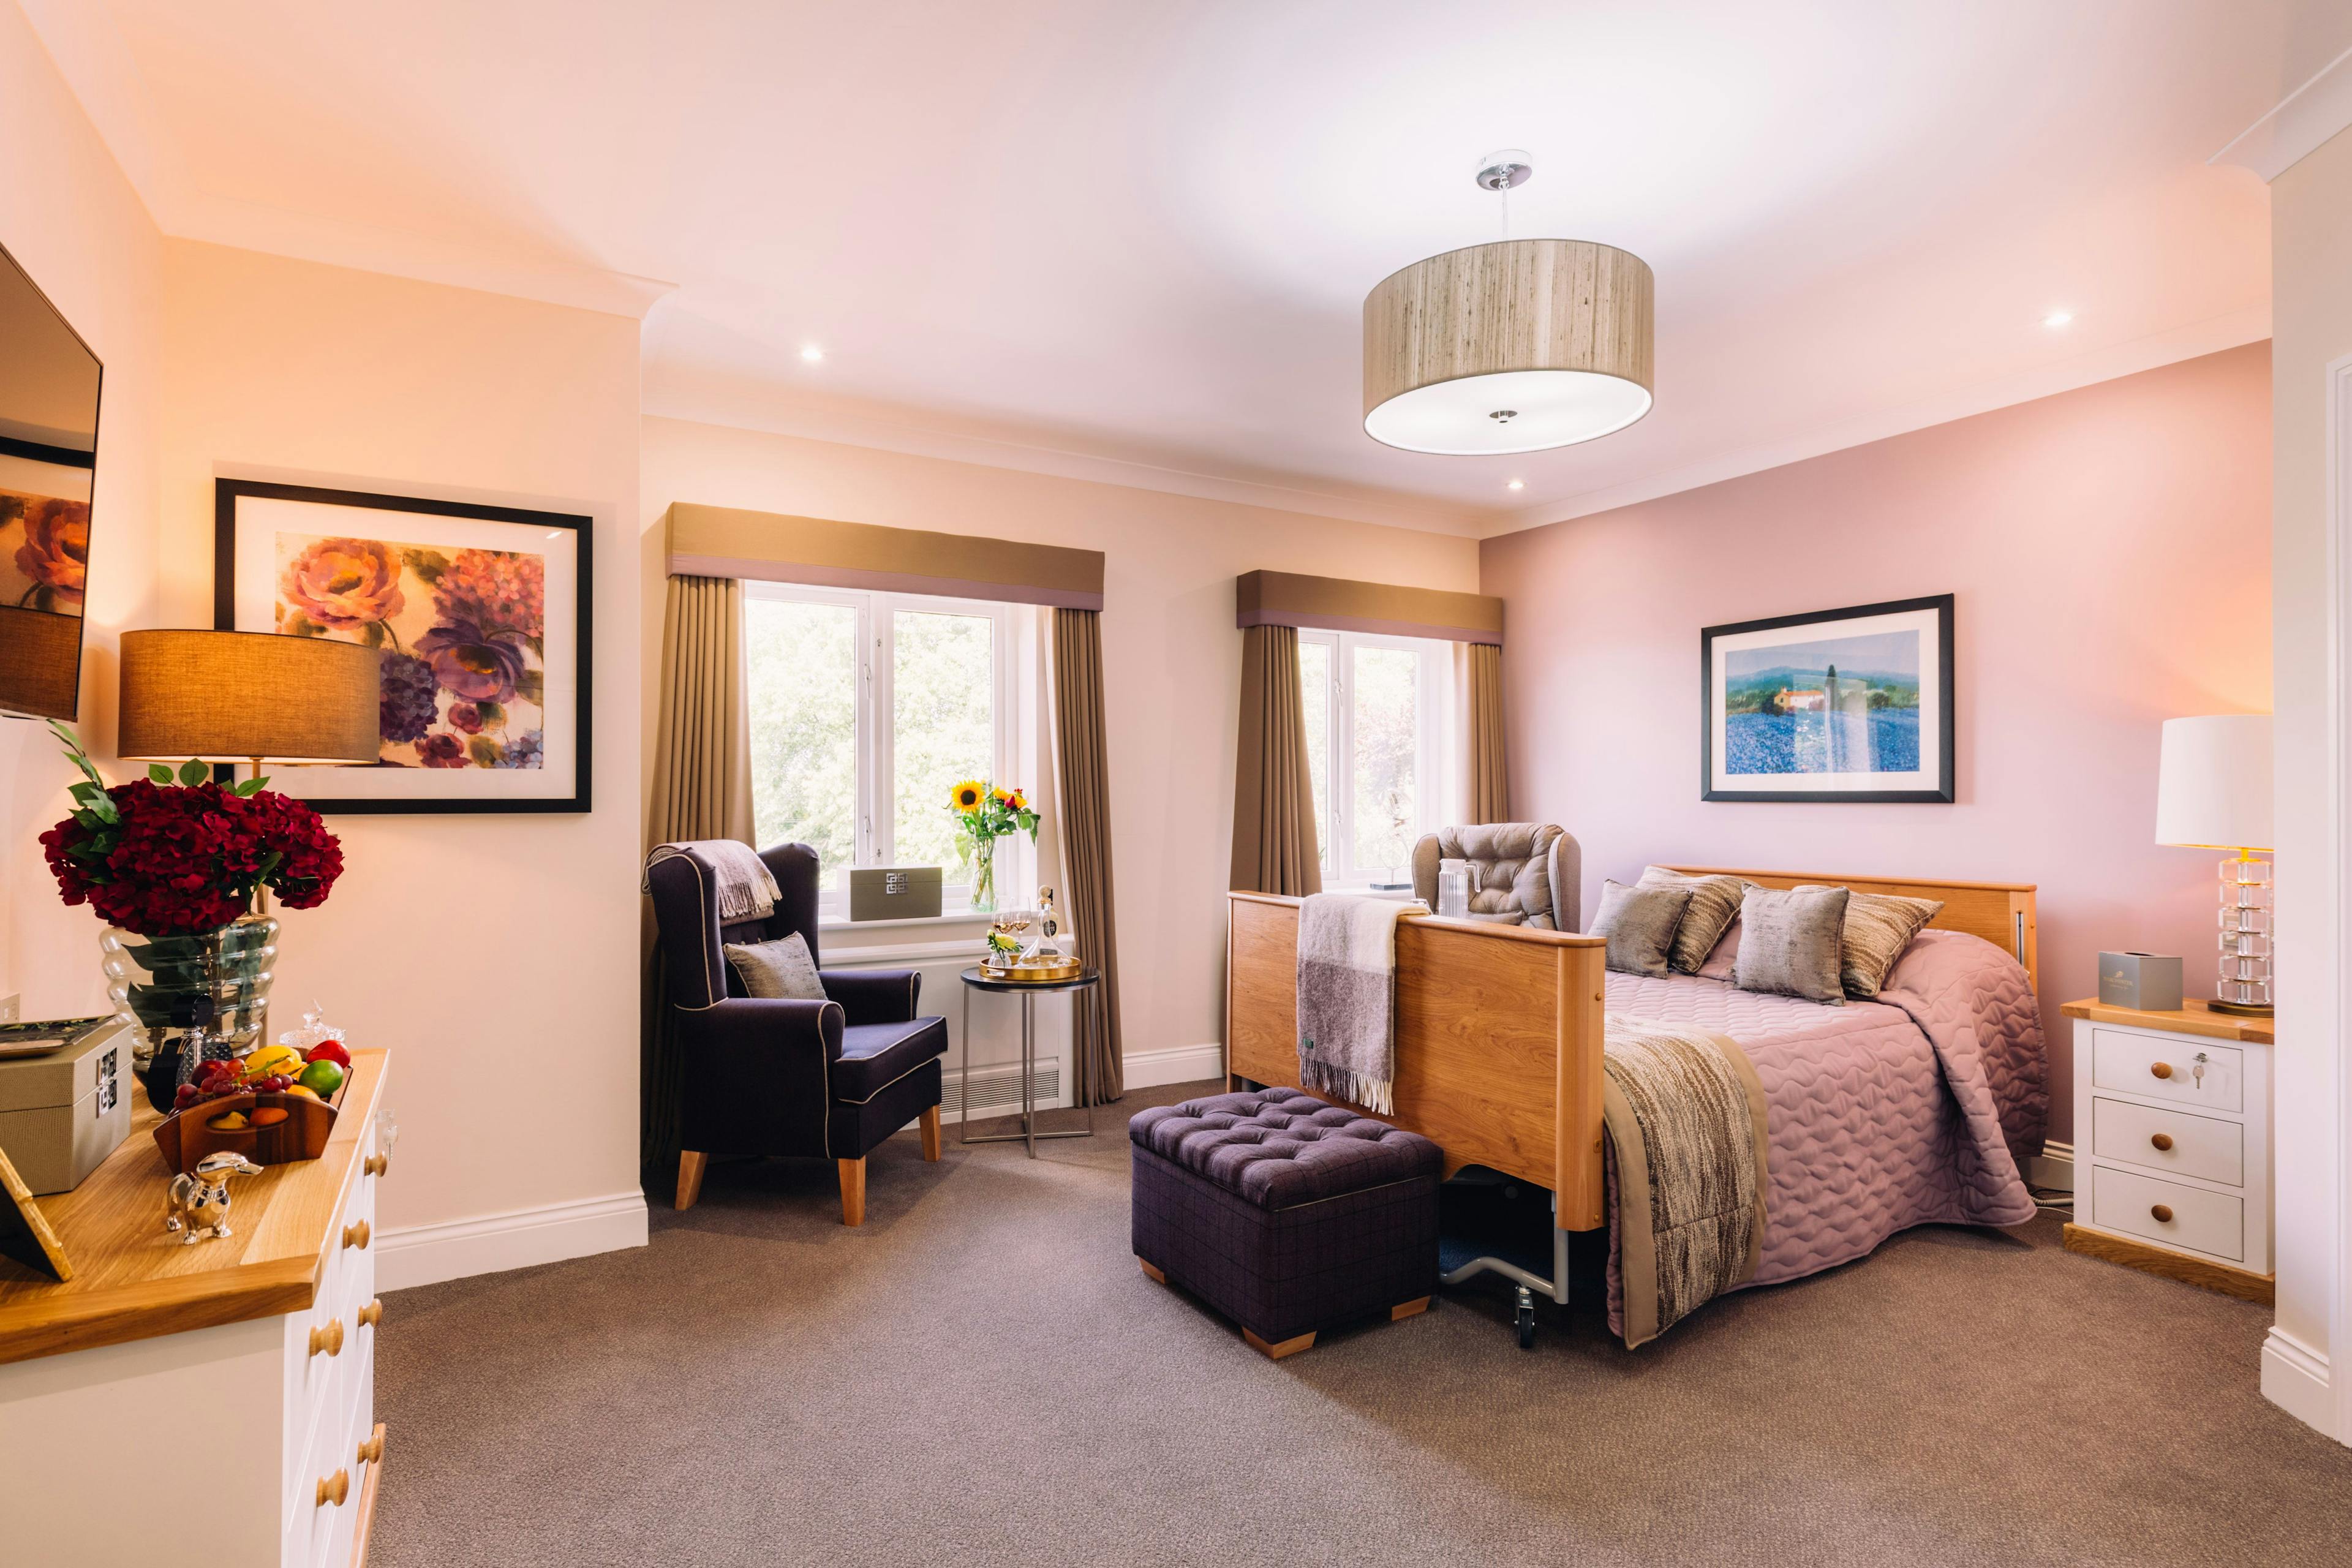 Bedroom at Peony Court Care Home in Croydon, Greater London